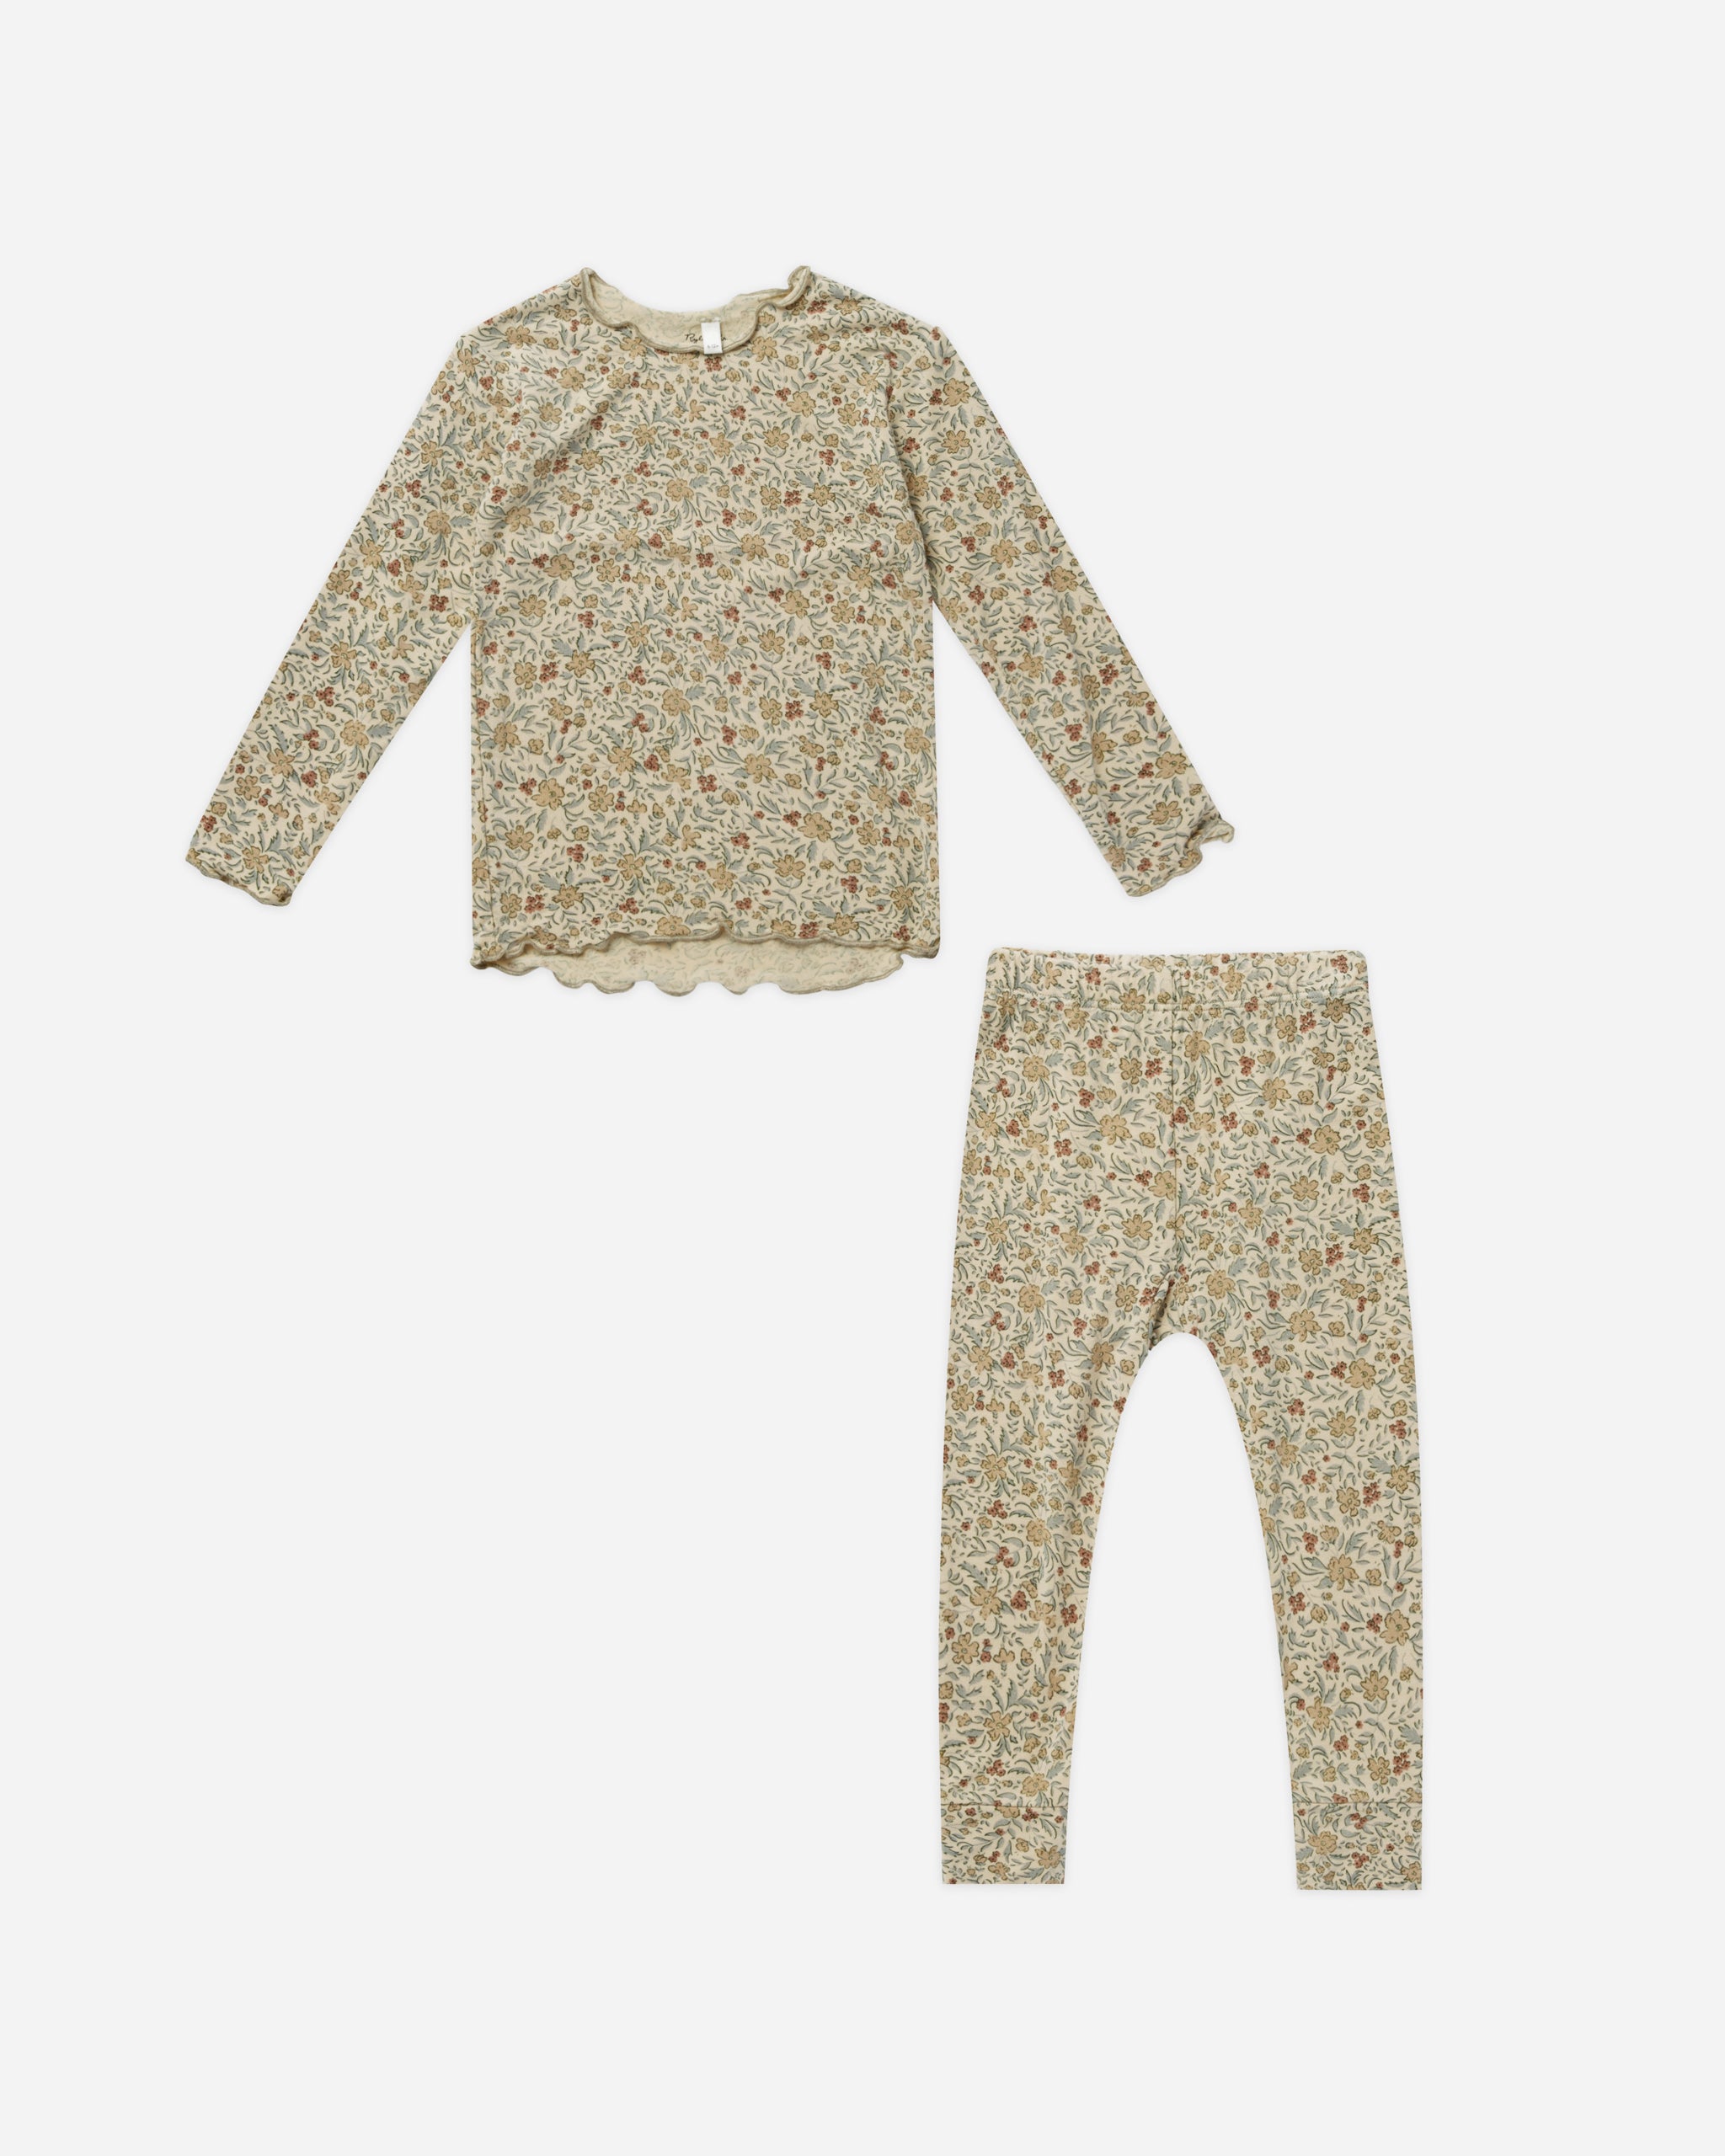 Modal Pajama Set || Golden Garden - Rylee + Cru | Kids Clothes | Trendy Baby Clothes | Modern Infant Outfits |